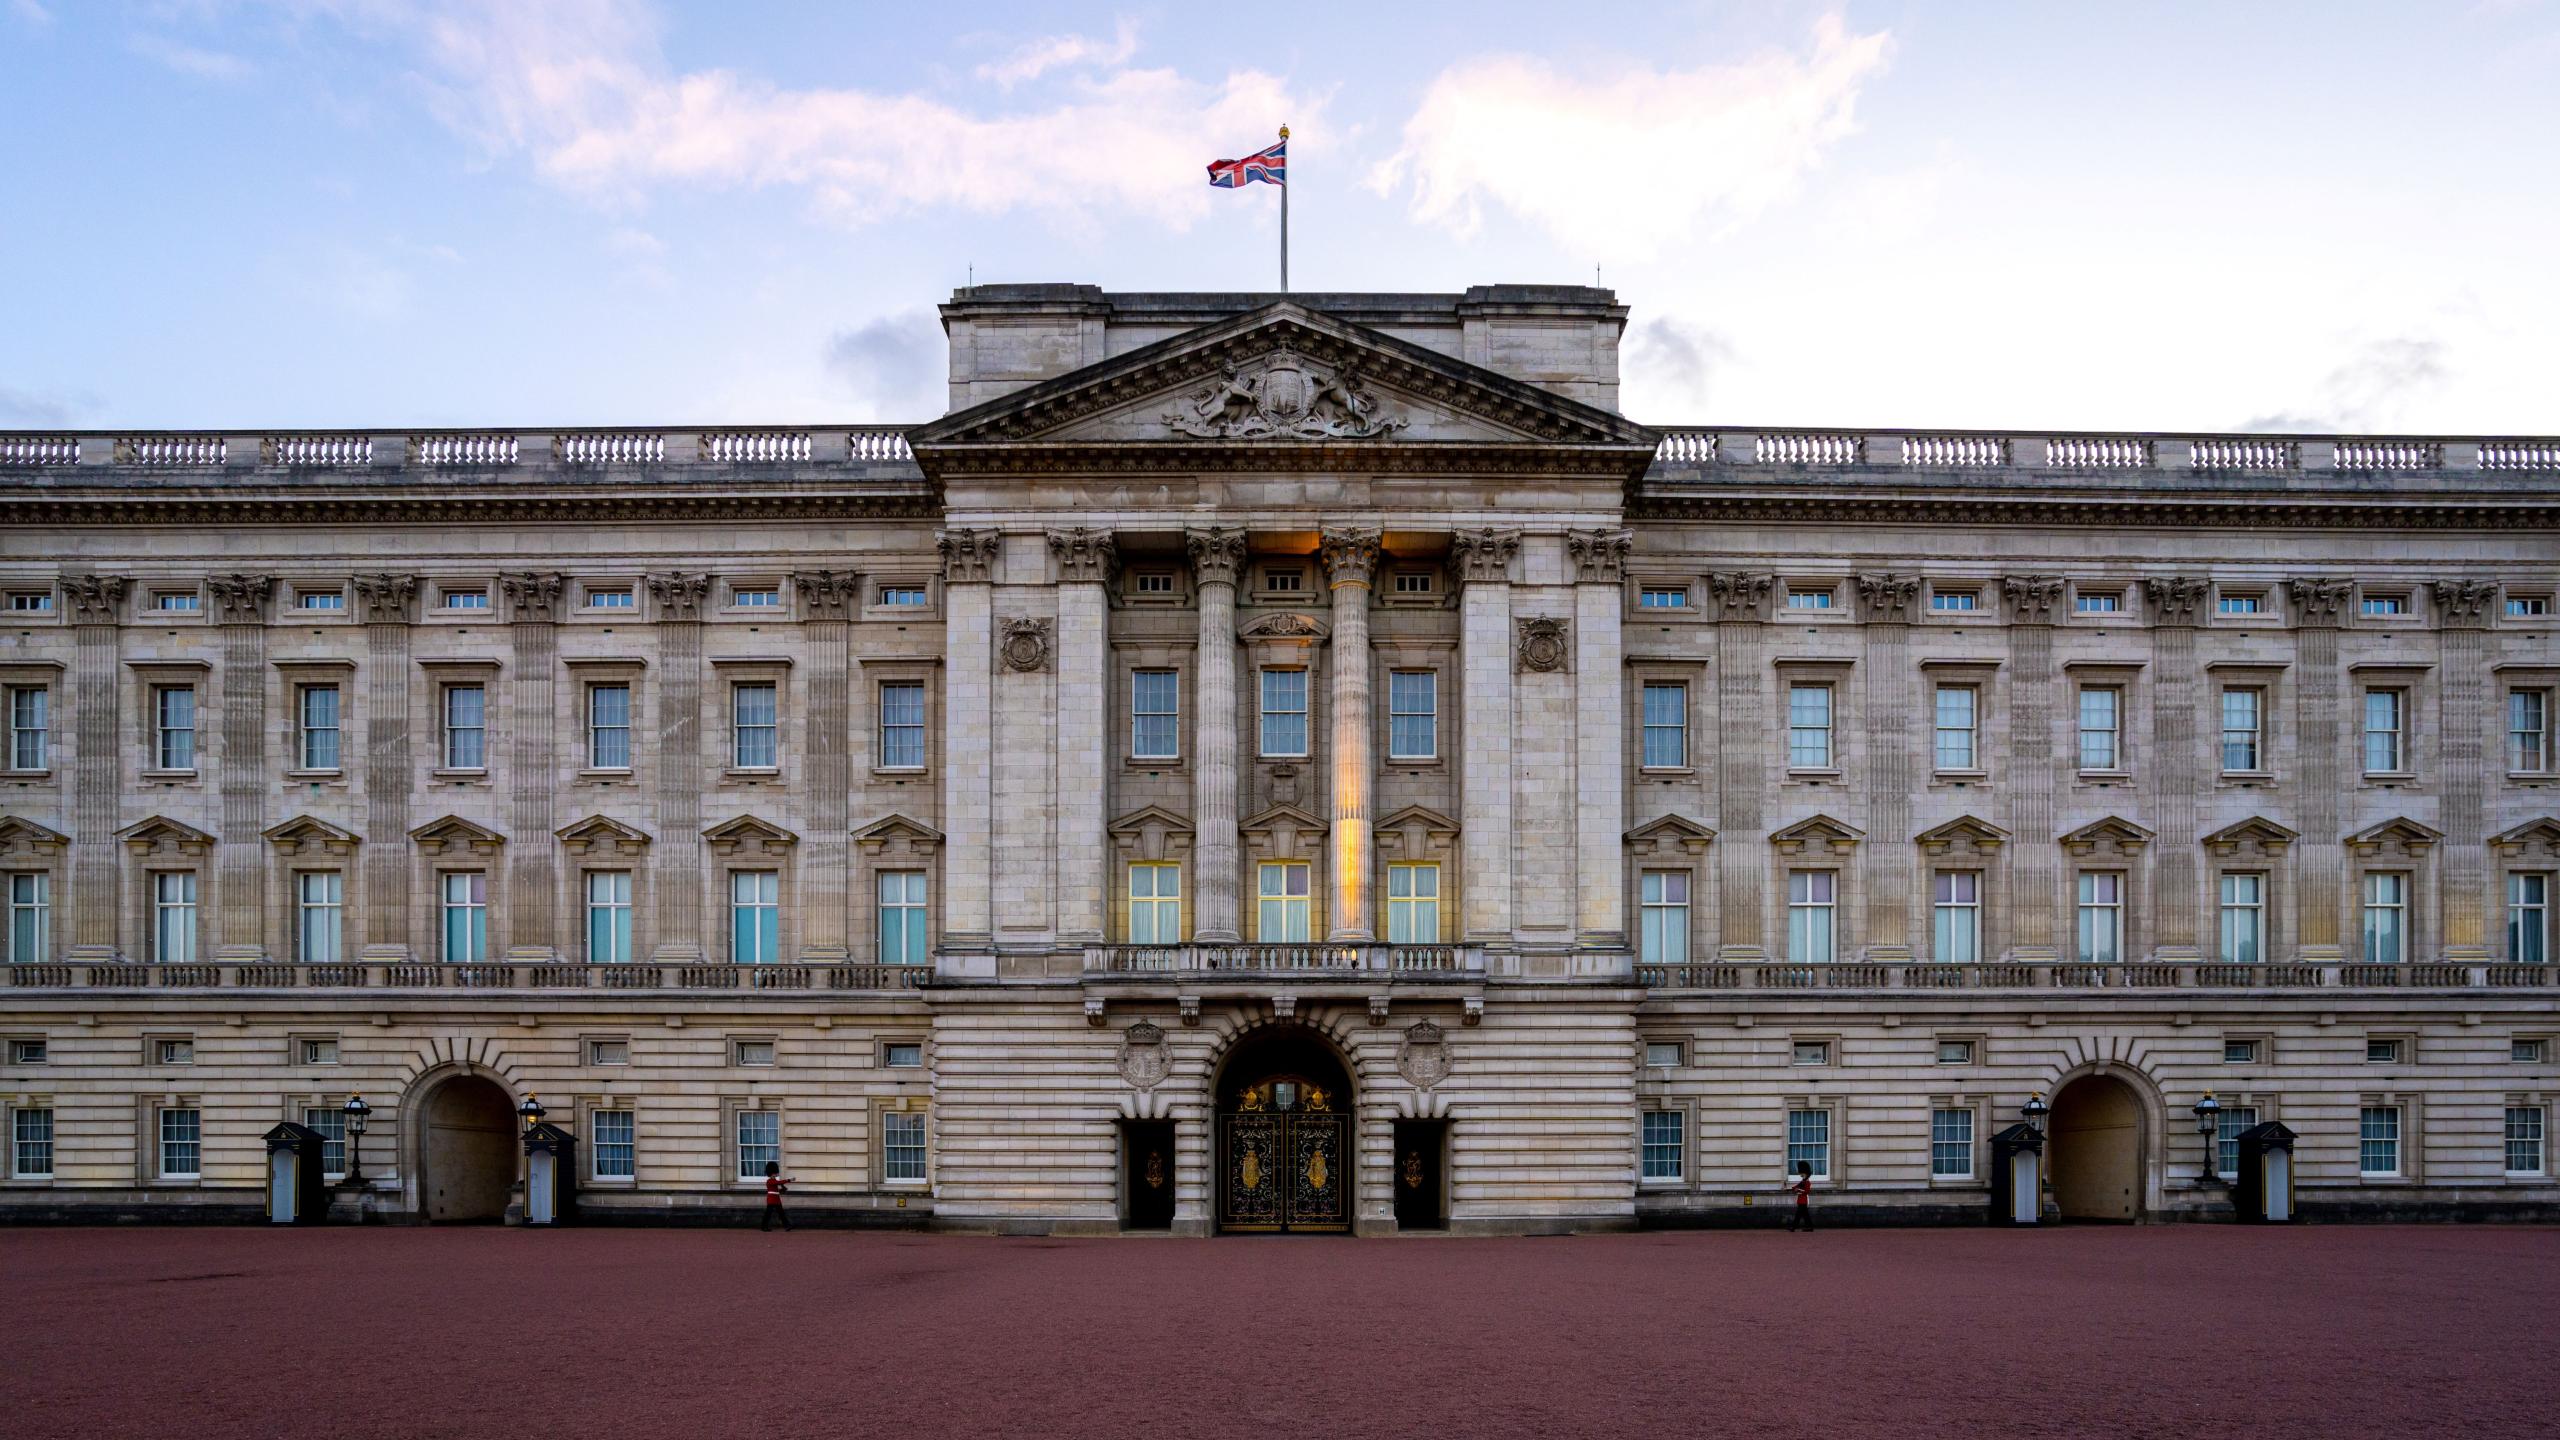 The front of Buckingham Palace with a blue sky in the background.